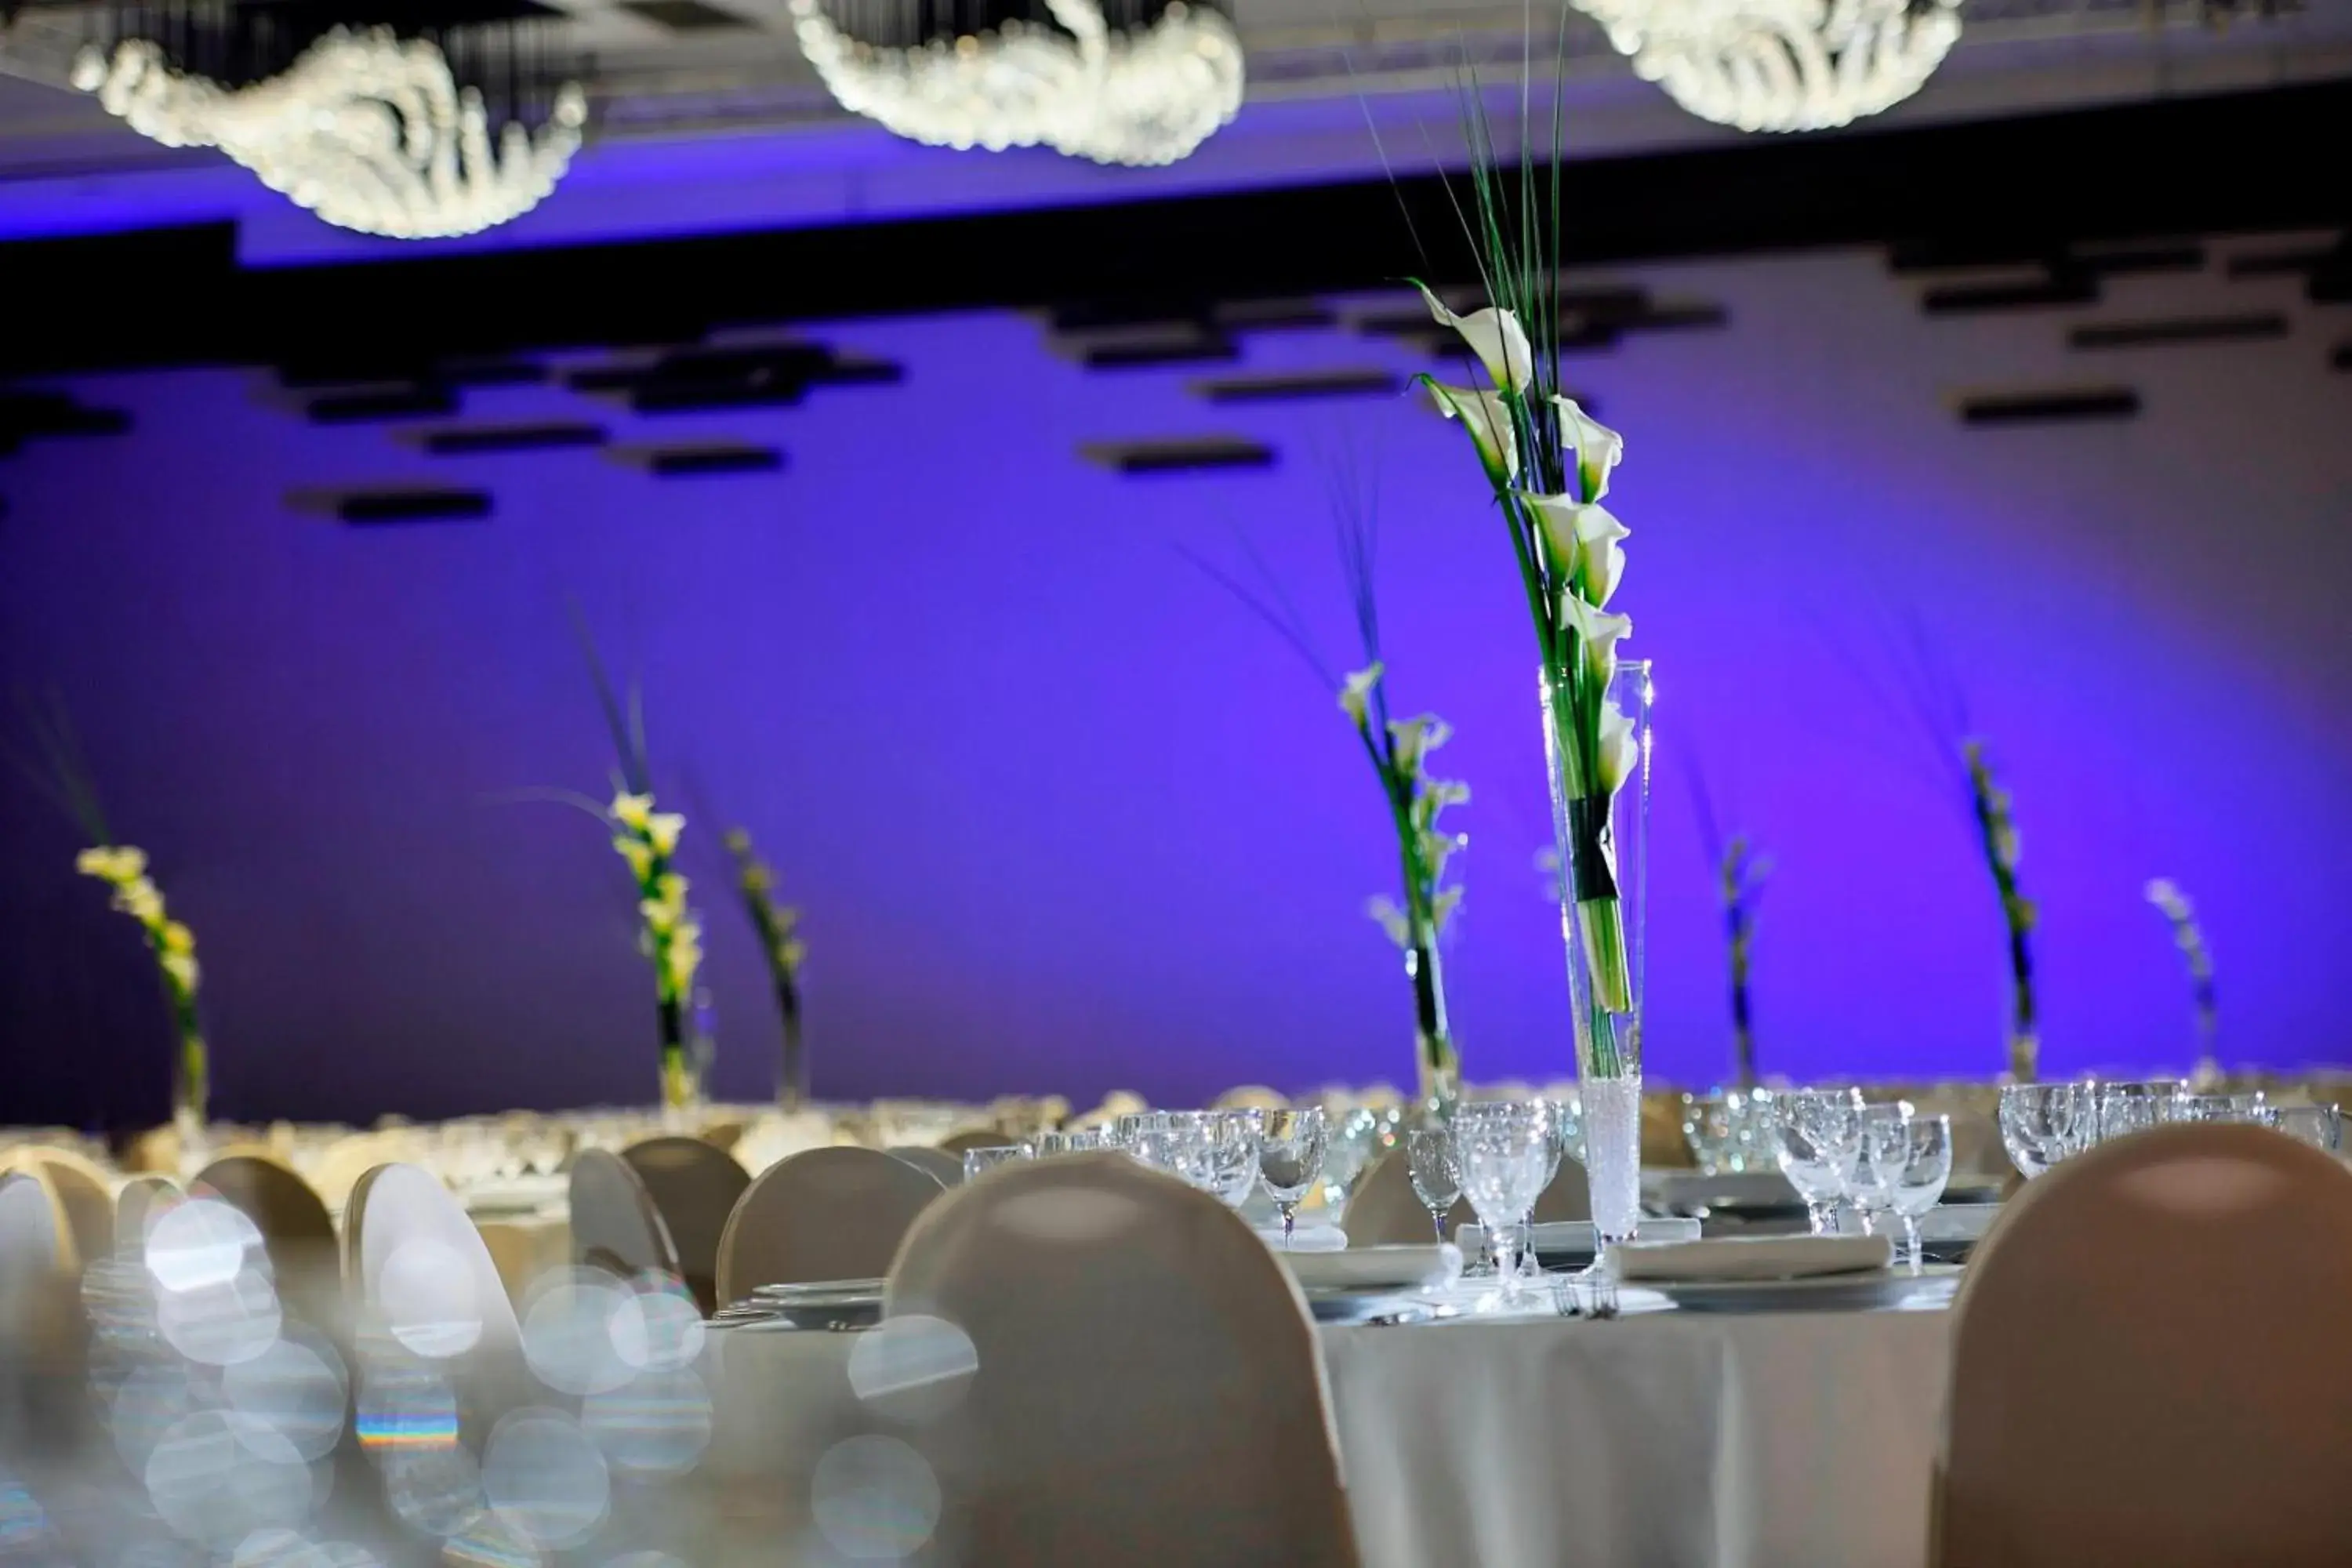 Meeting/conference room, Banquet Facilities in Paris Marriott Rive Gauche Hotel & Conference Center